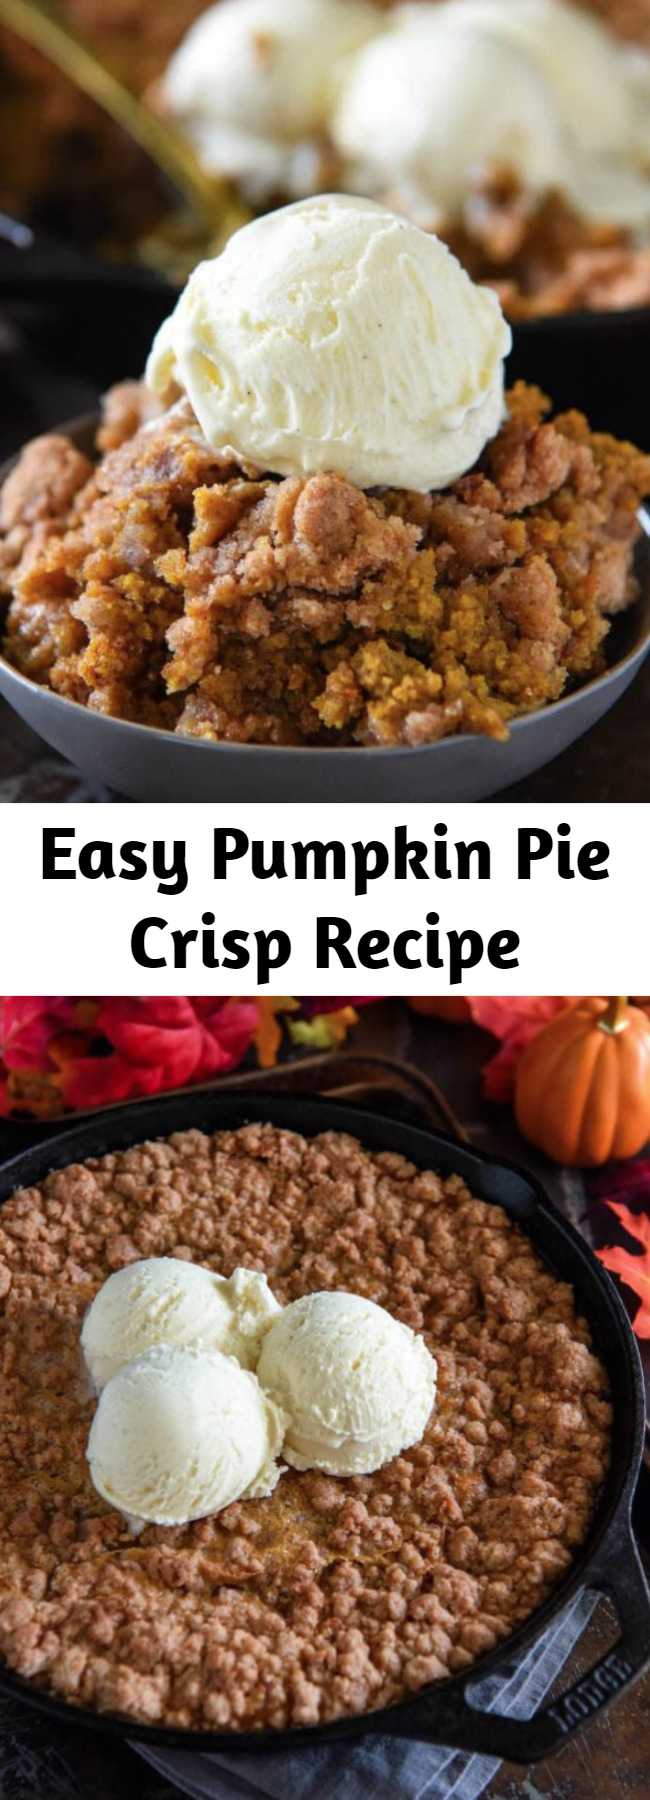 Easy Pumpkin Pie Crisp Recipe - A sweet creamy pumpkin pie filling is topped with a beautiful crunchy golden cinnamon streusel and baked to perfection. When served warm with vanilla ice cream, this Pumpkin Pie Crisp just might be better than the classic pumpkin pie! #PumpkinPieCrisp #PumpkinCrisp #Pumpkin #PumpkinRecipes #PumpkinCobbler #PumpkinDesserts #FallRecipes #FallDesserts #Cobbler